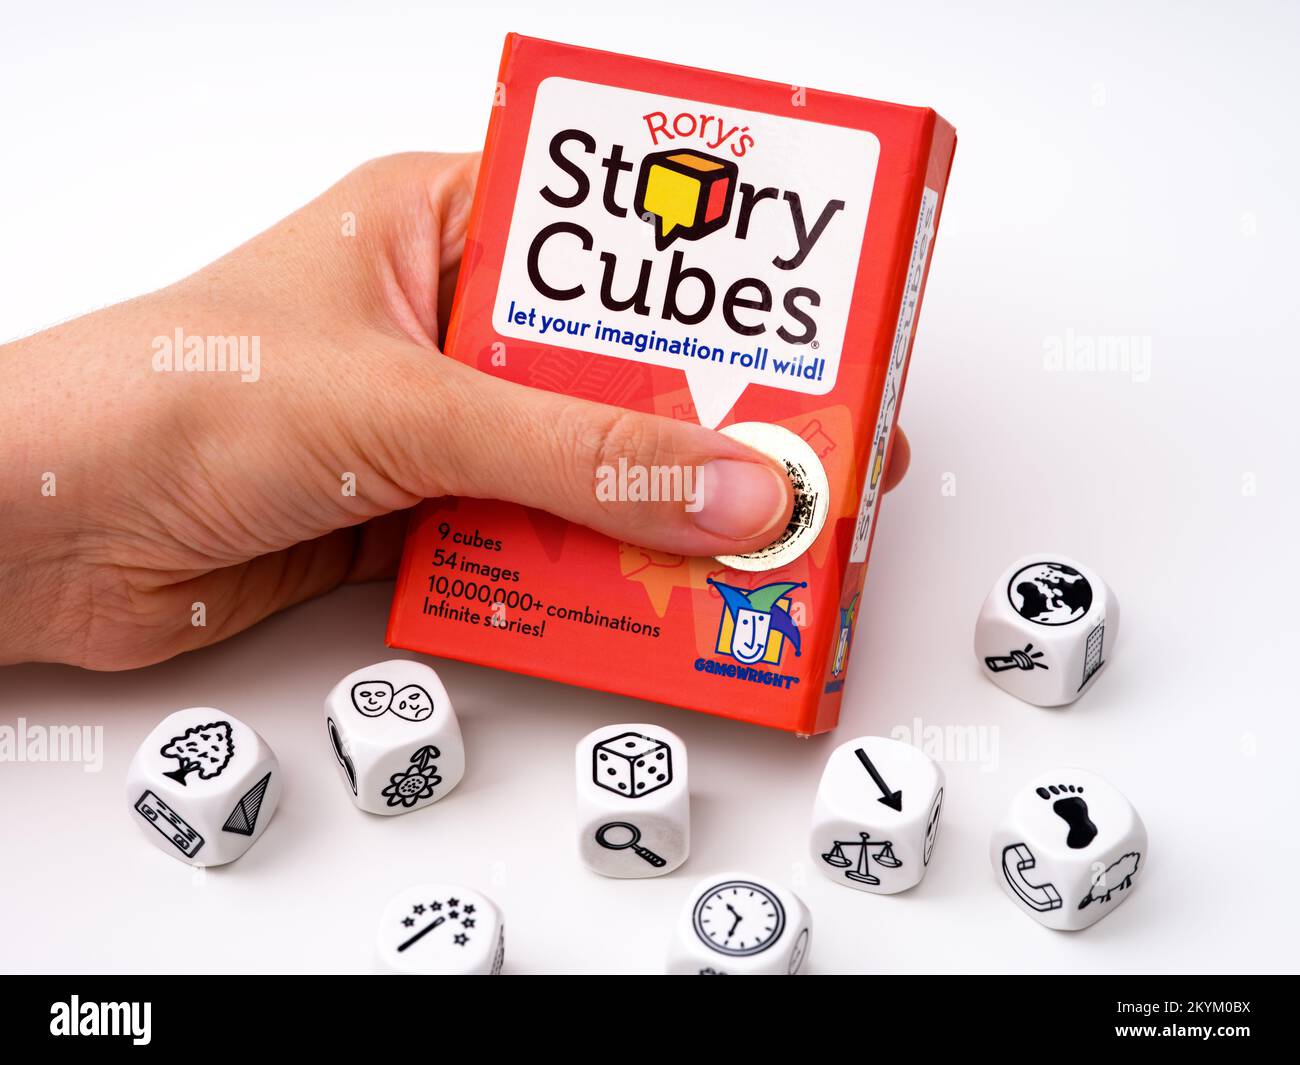 Rory's Story Cubes Arcade